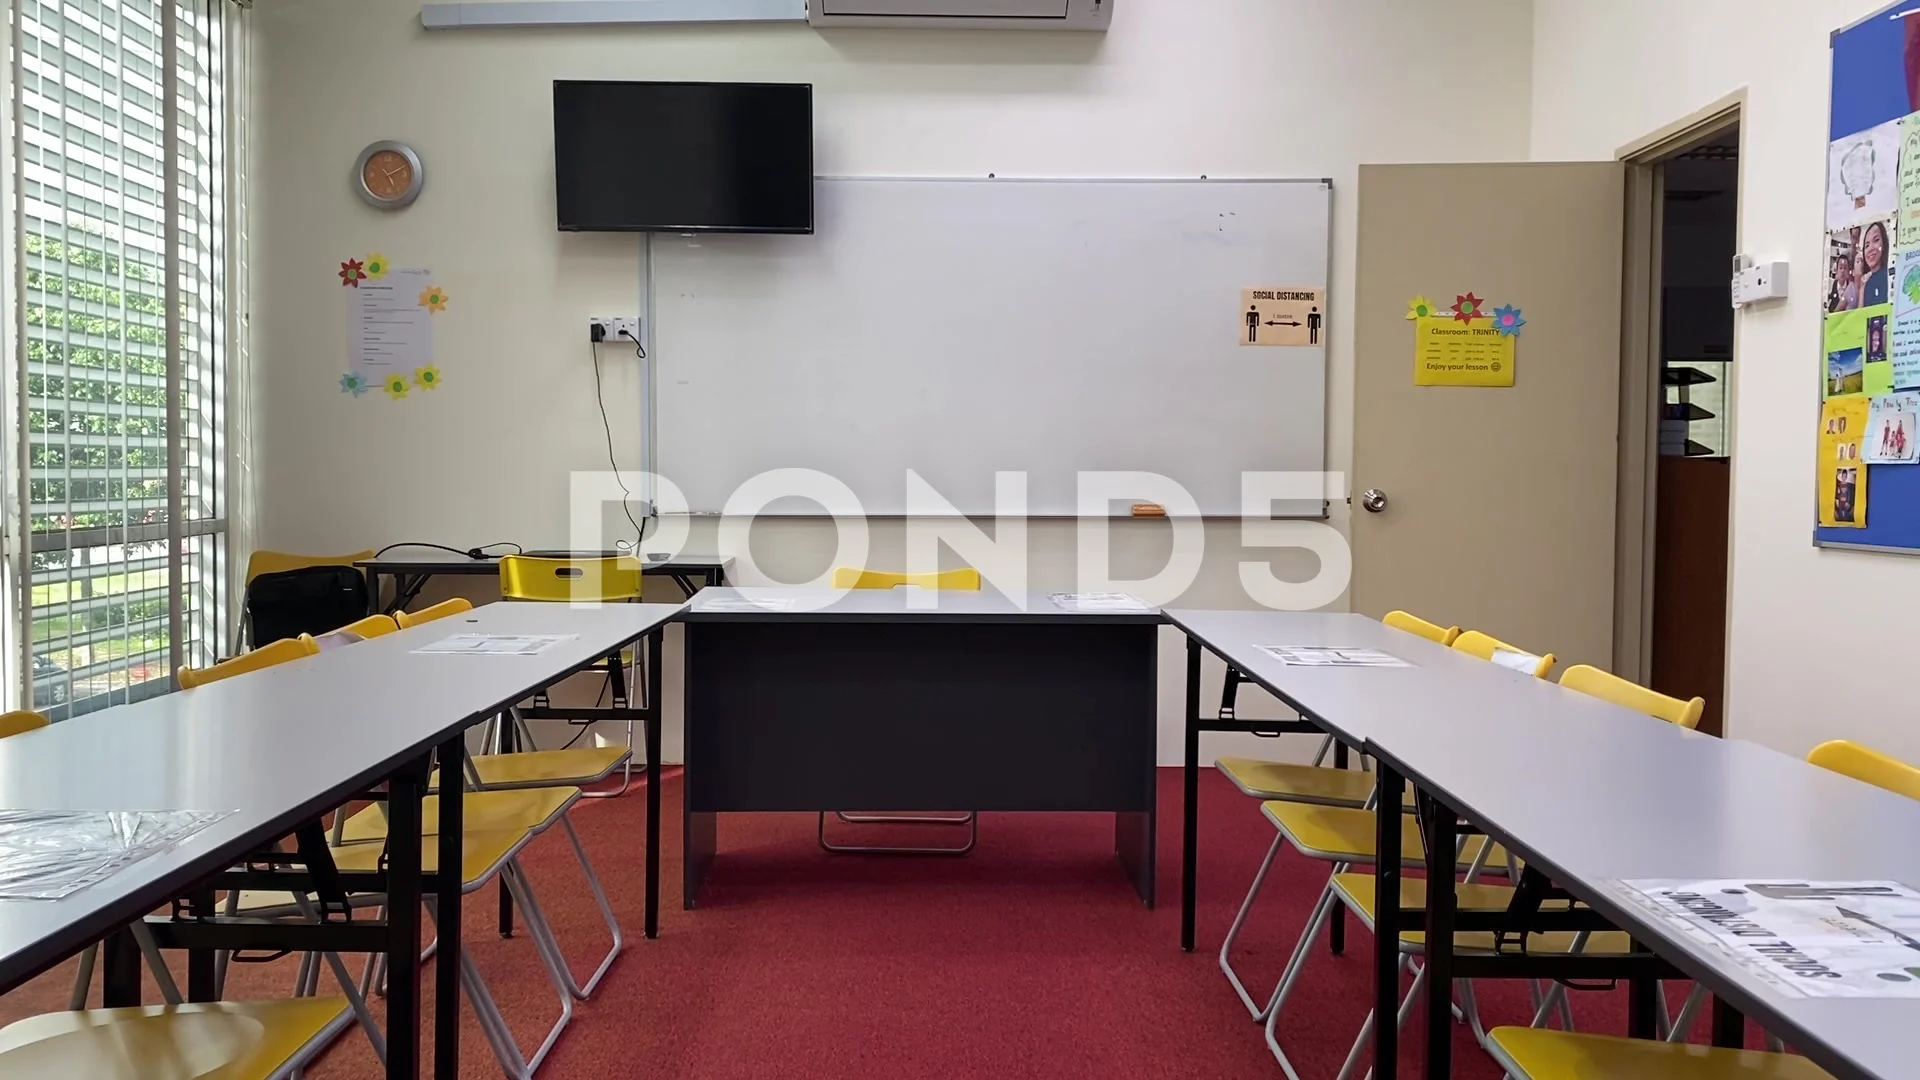 tuition centre empty class room during c... | Stock Video | Pond5